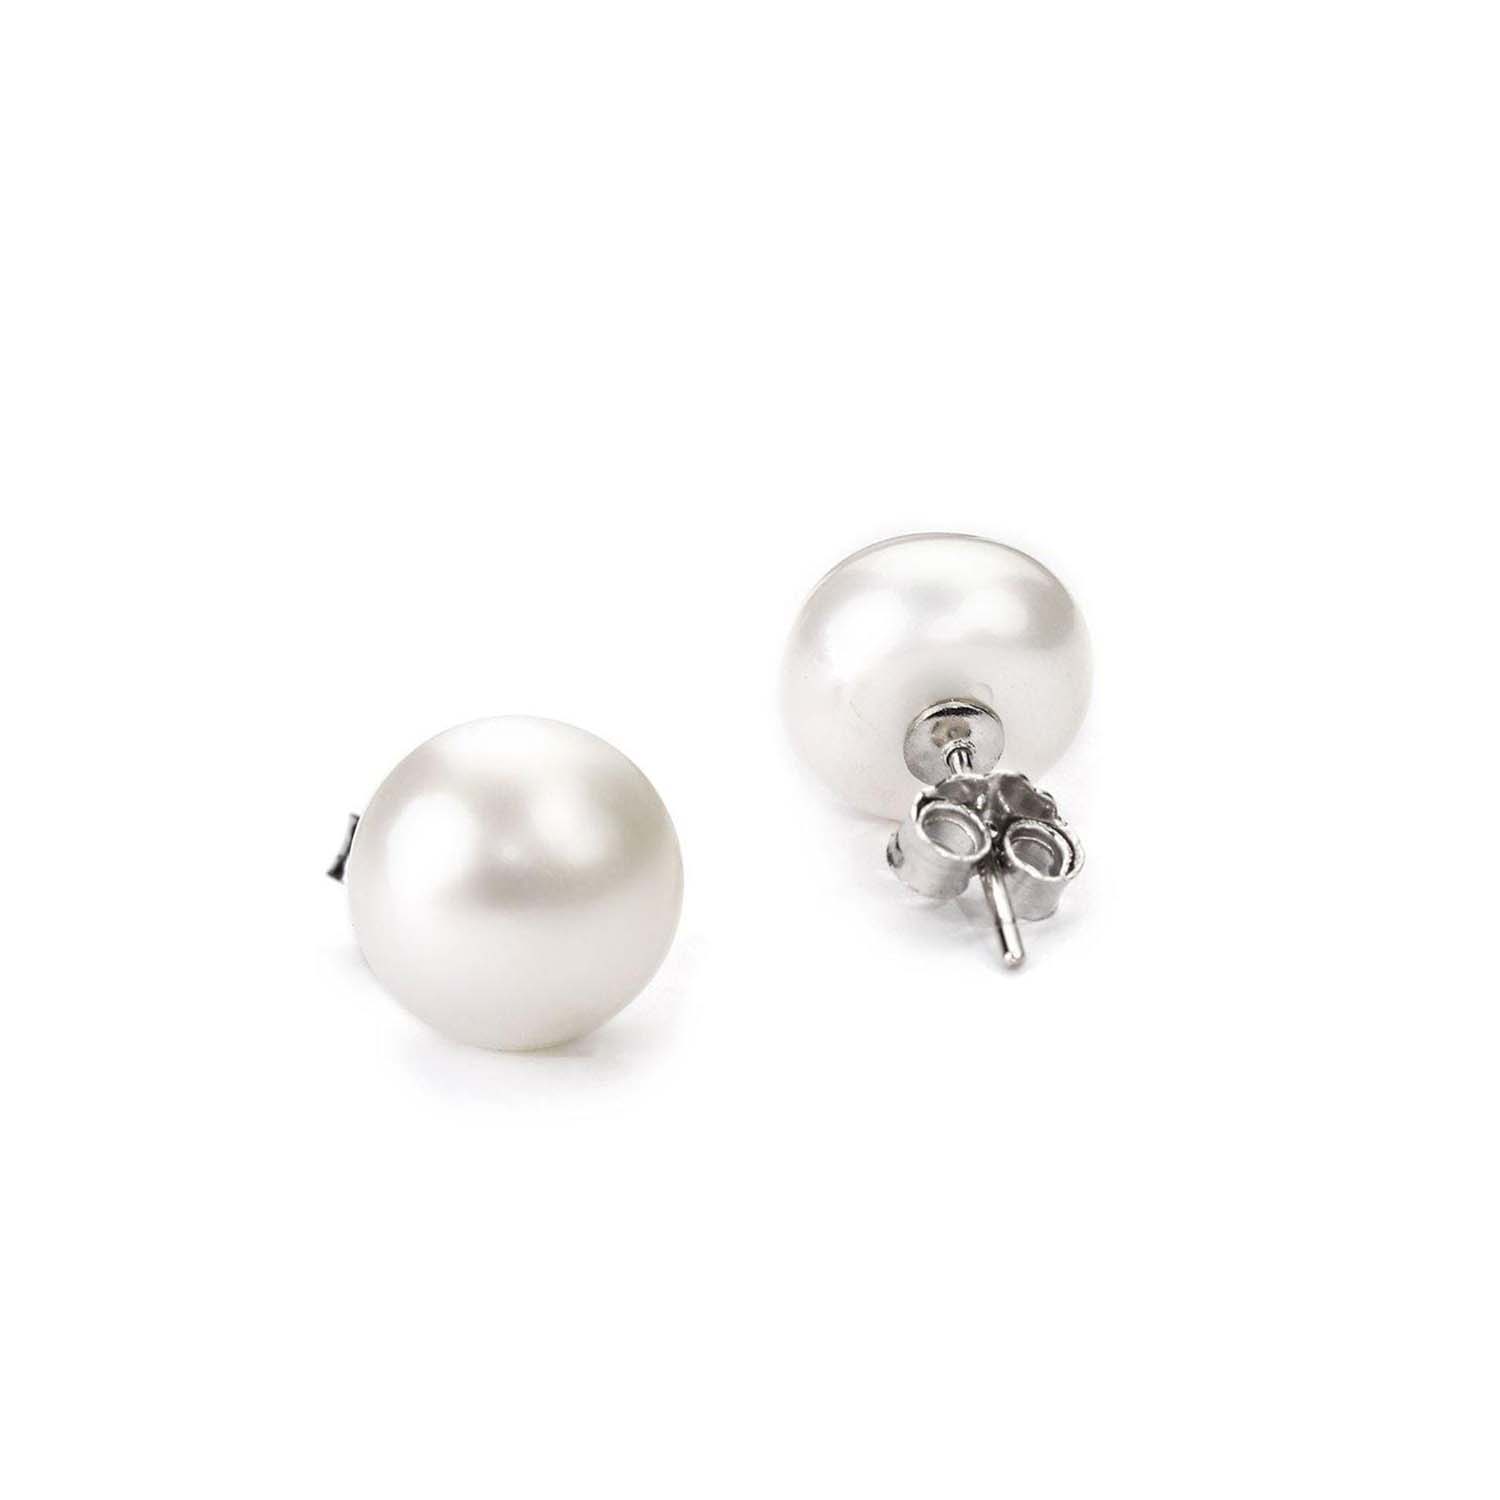 Stunning 925 Silver Freshwater Pearl Trio